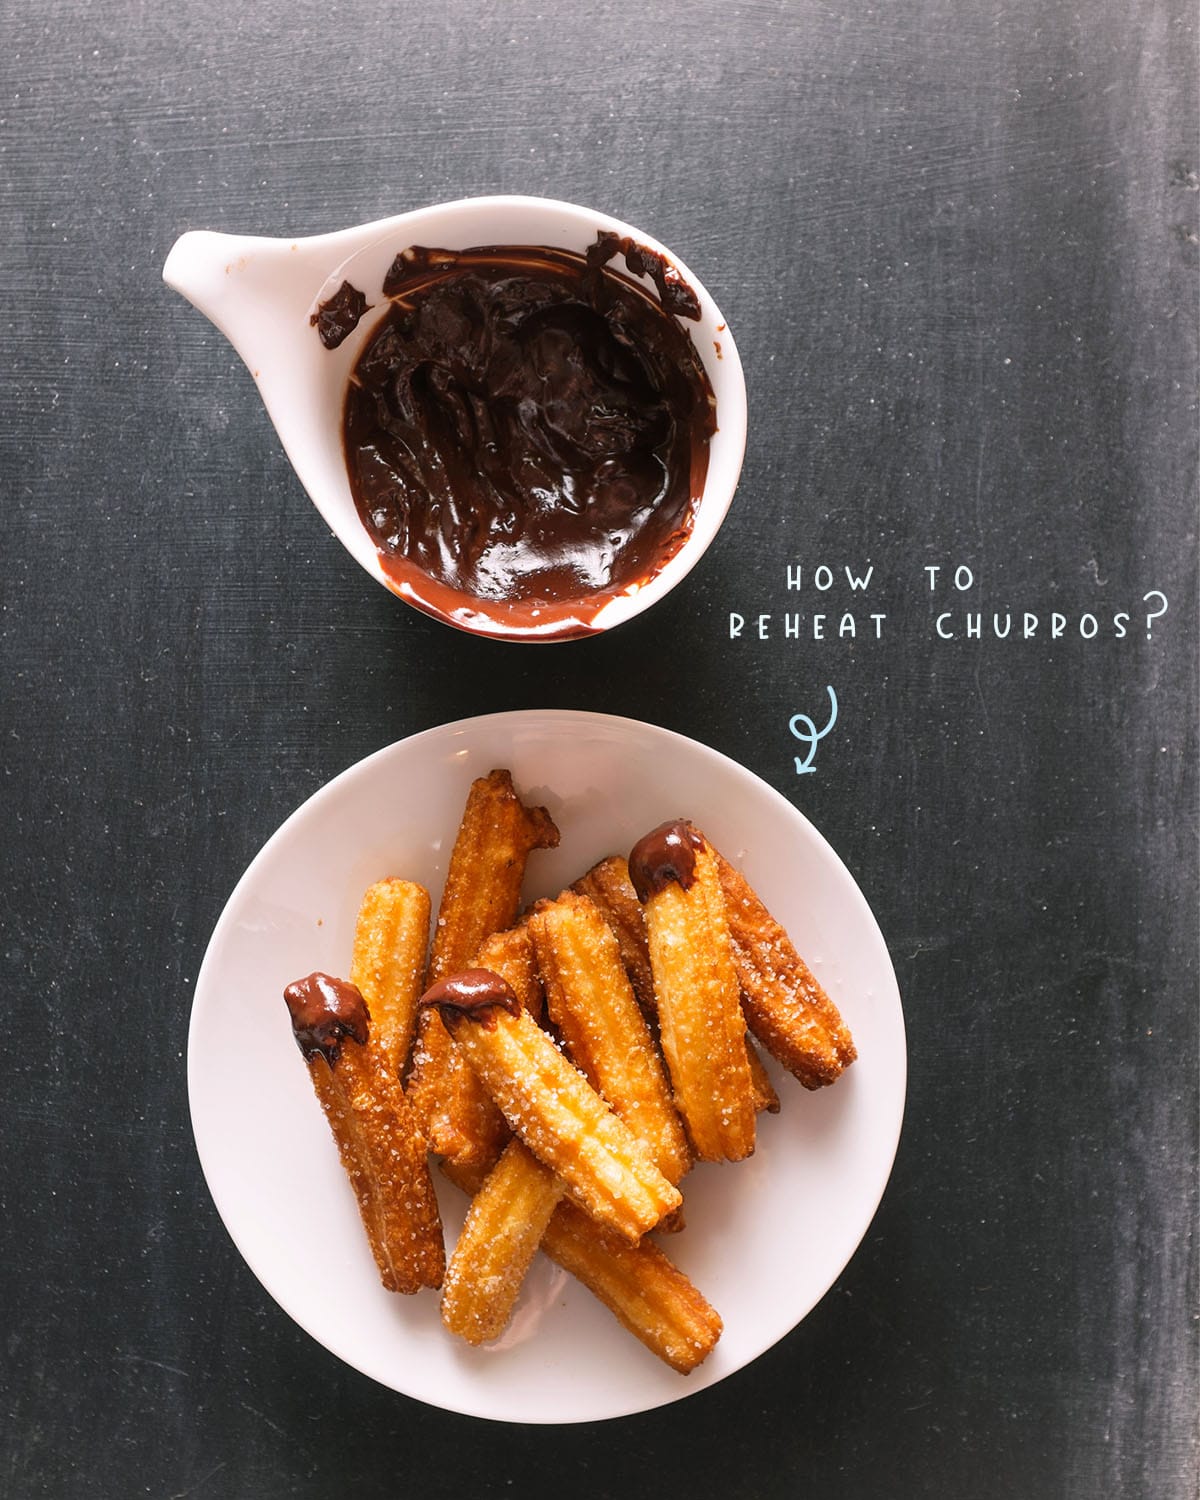 A quick and easy way to reheat churros is to heat them in an oven or air fryer. This ensures that all the sides of the churro are reheated